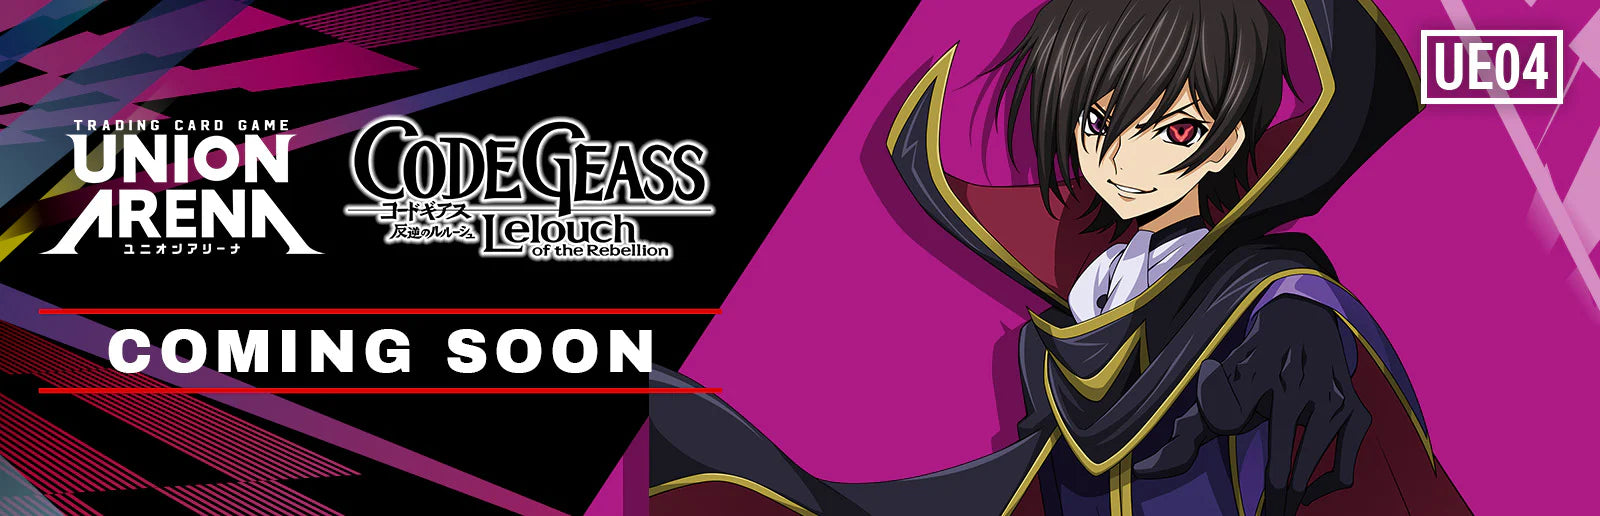 UNION ARENA - CODE GEASS: LELOUCH OF THE REBELLION BOOSTER BOX (PRE-ORDER) Bandai | Red Riot Games CA